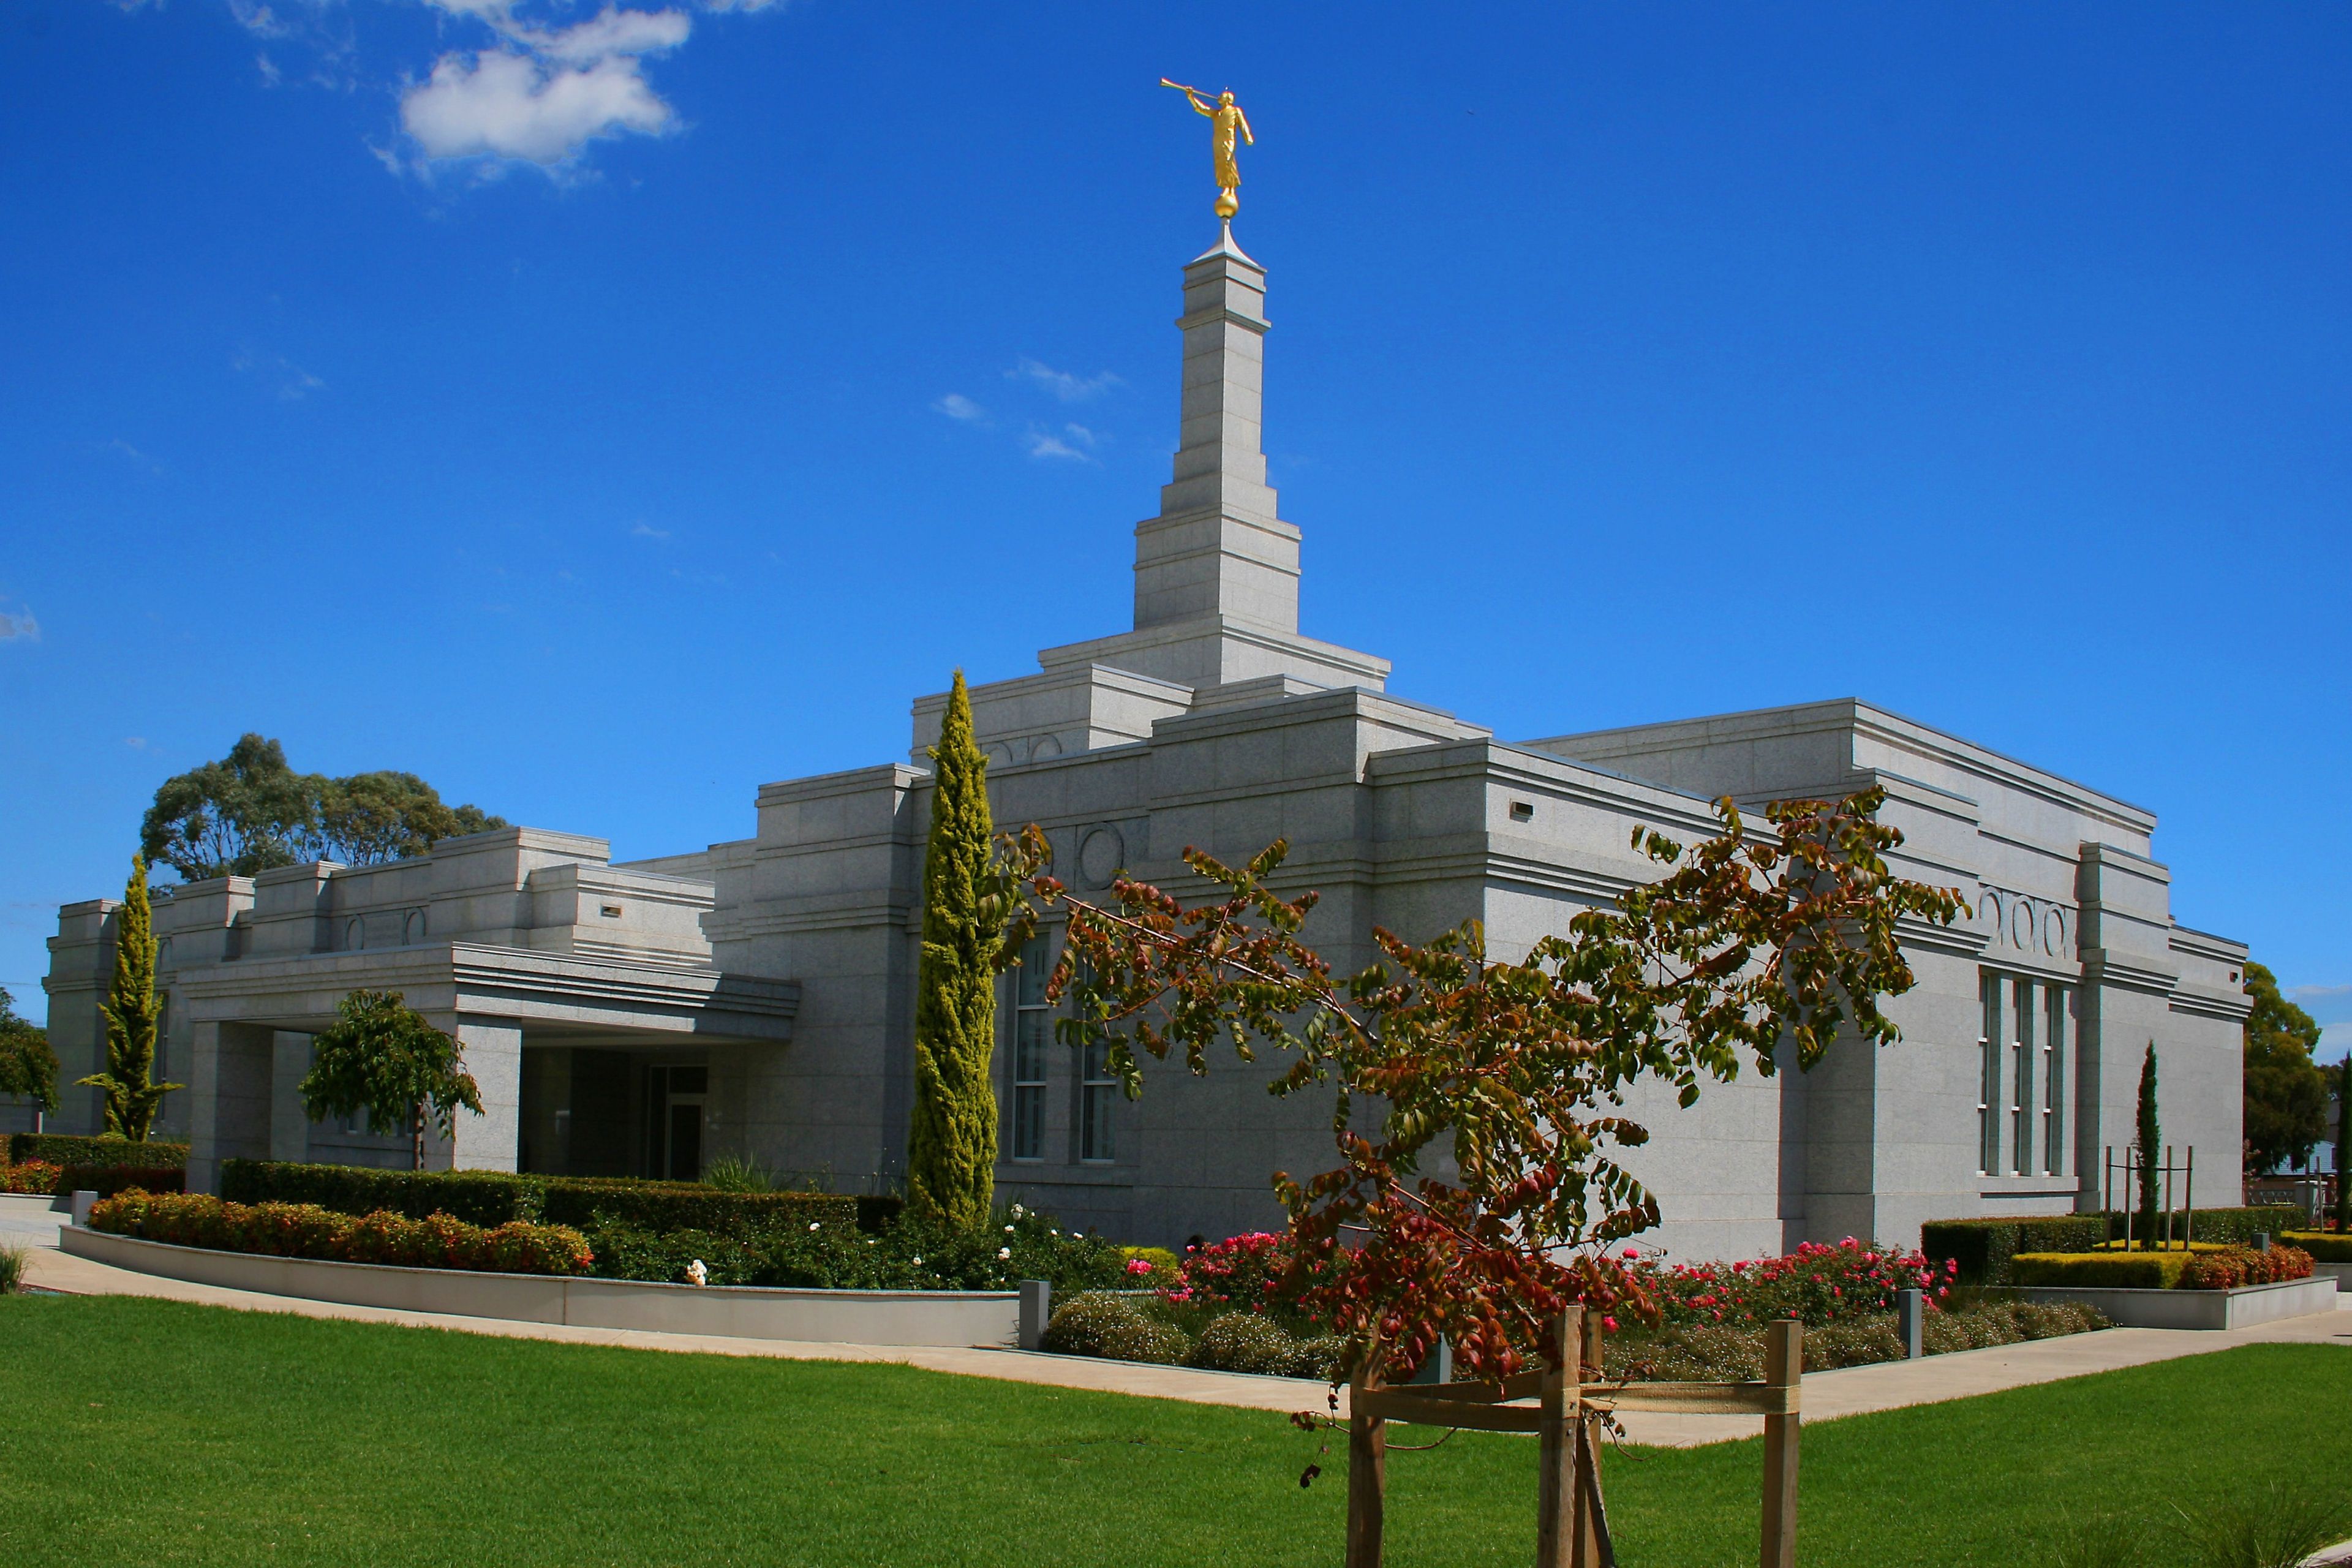 The Adelaide Australia Temple in the daytime.